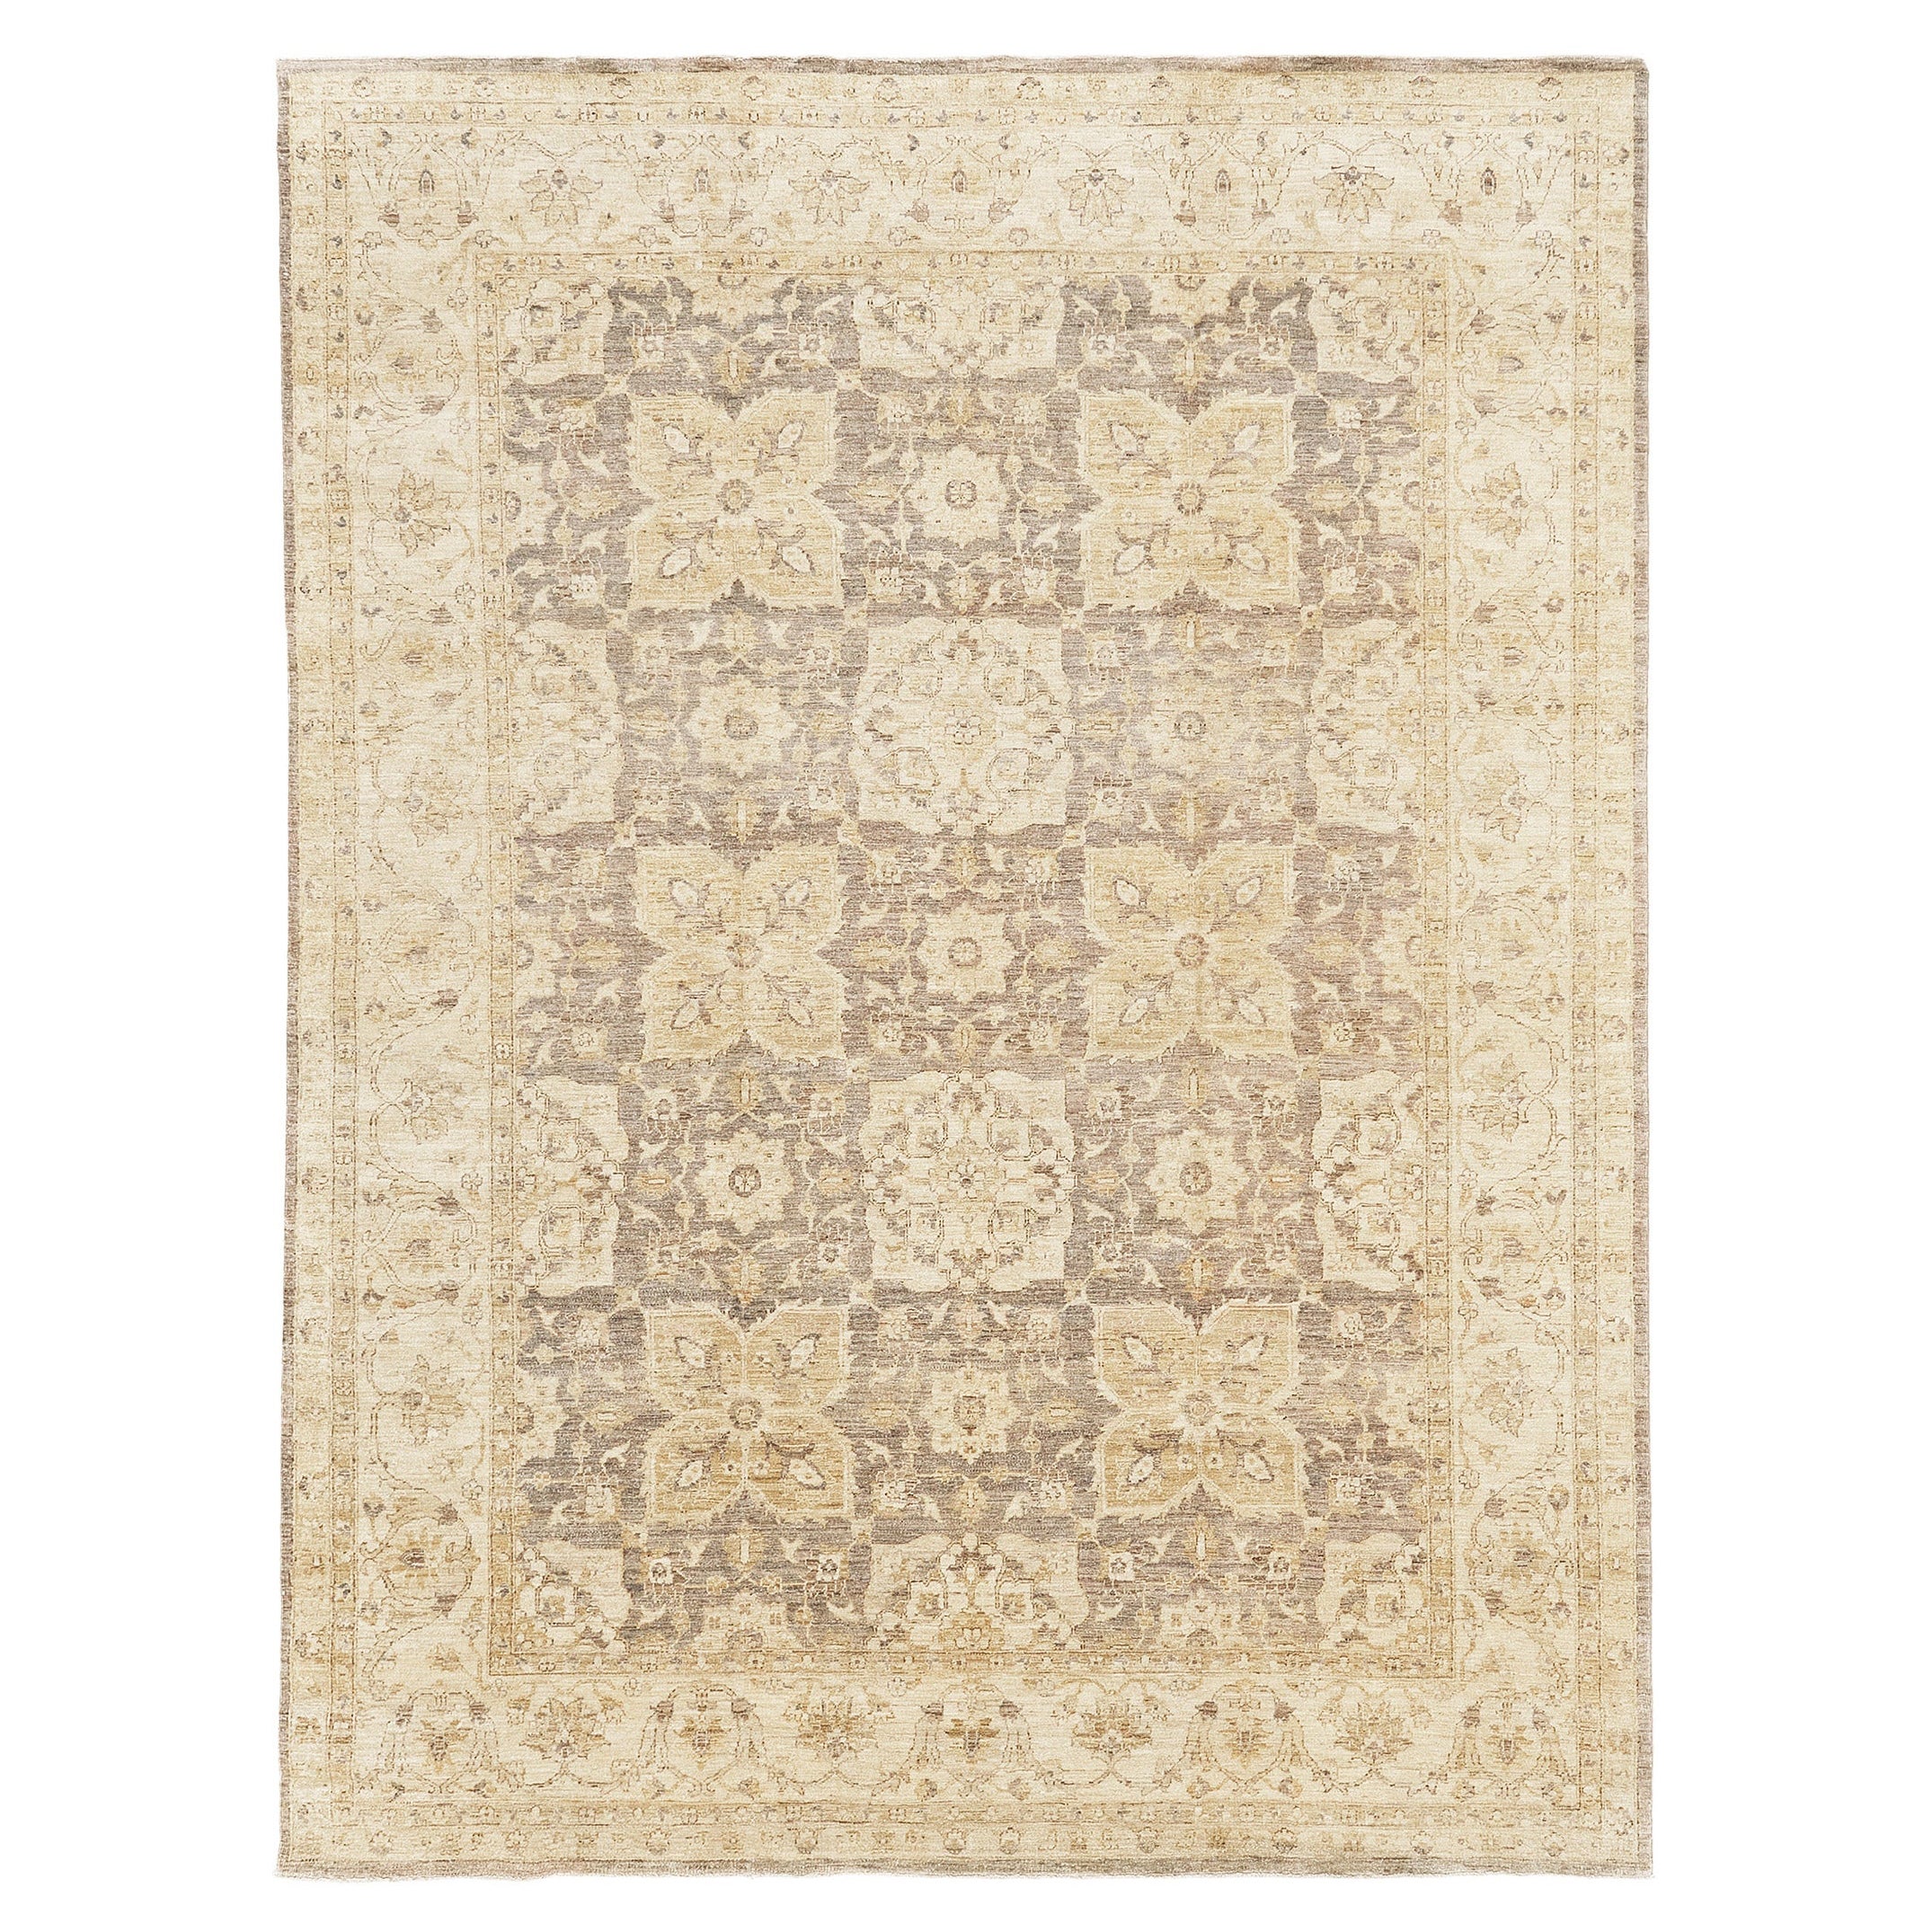 Natural Dye Agra Design Rug Bliss Collection D5559